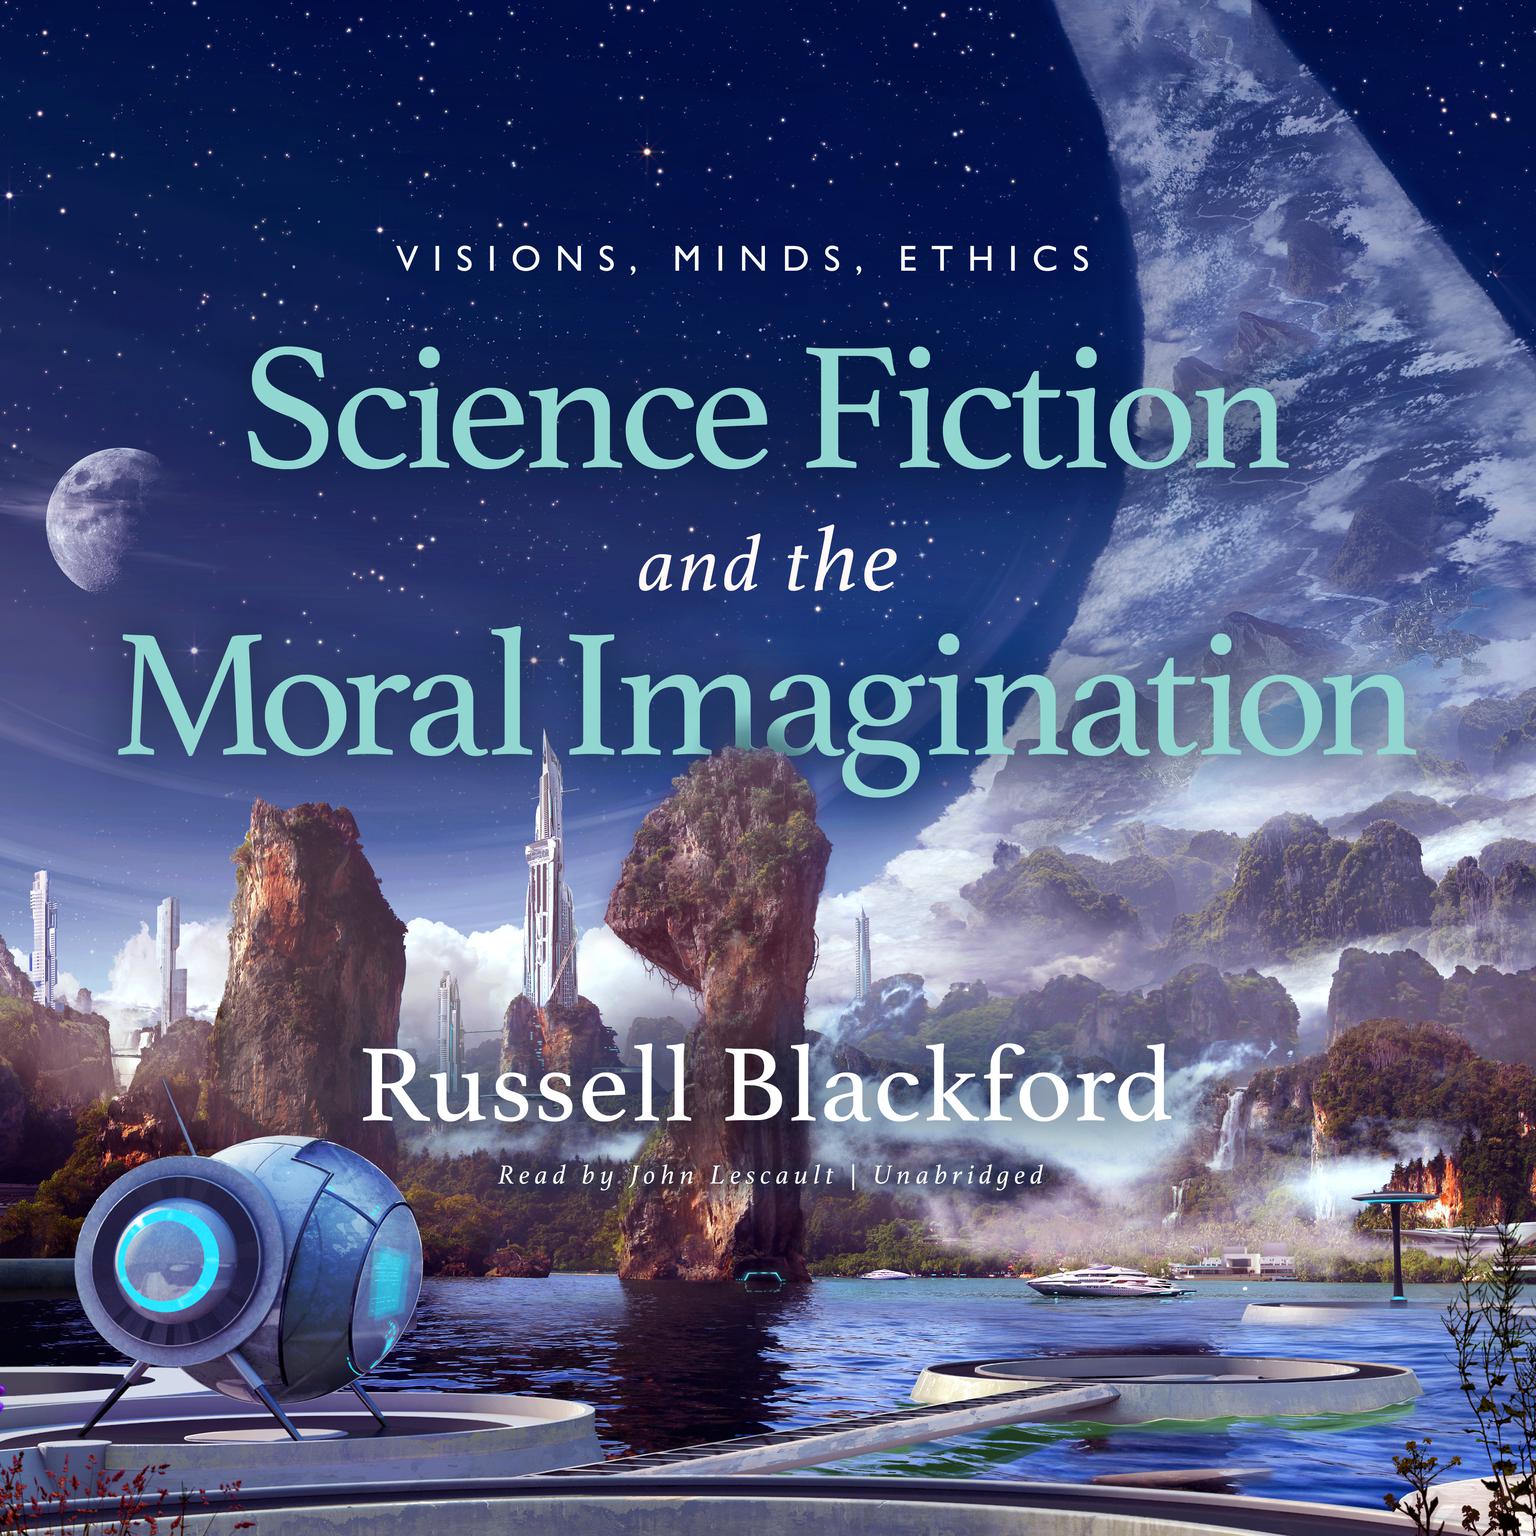 Science Fiction and the Moral Imagination: Visions, Minds, Ethics  Audiobook, by Russell Blackford